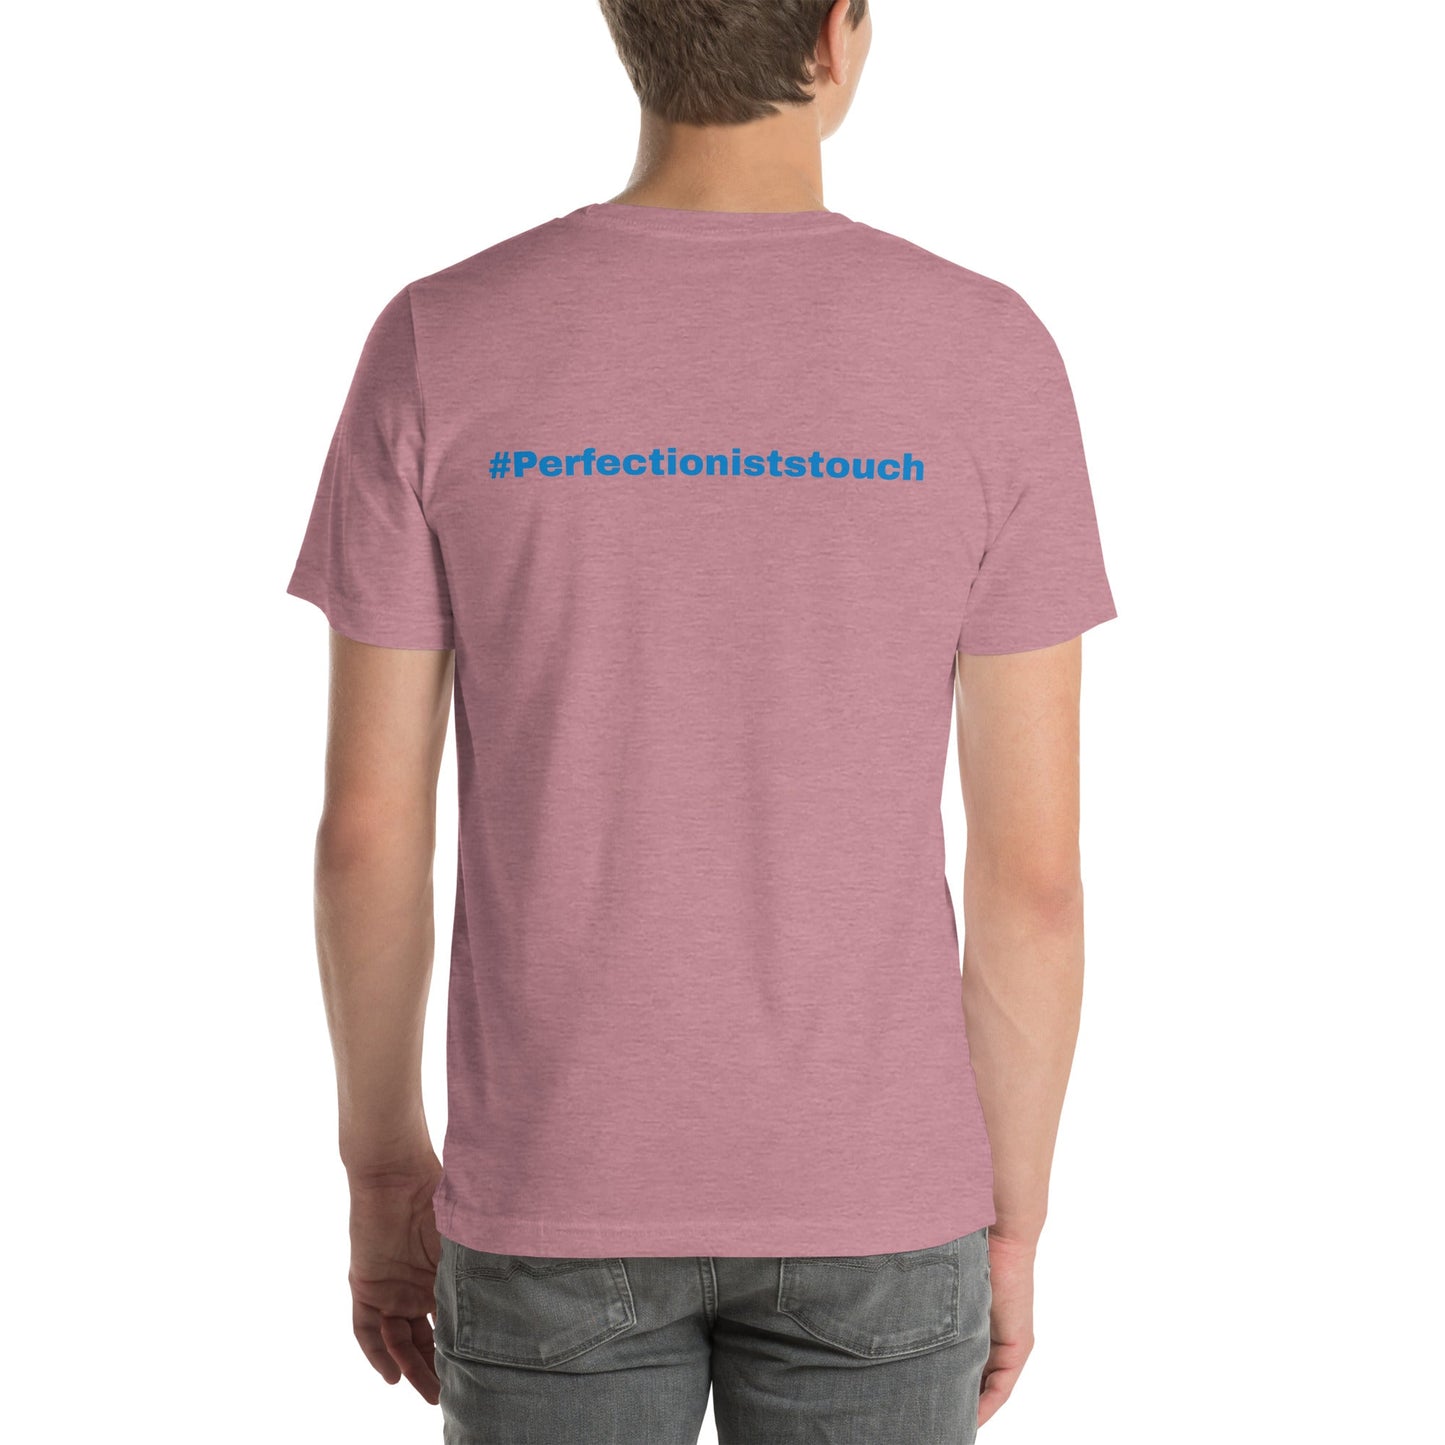 Brothers Auto Perfection - Perfectionists touch T-Shirt - Brothers Auto Perfection